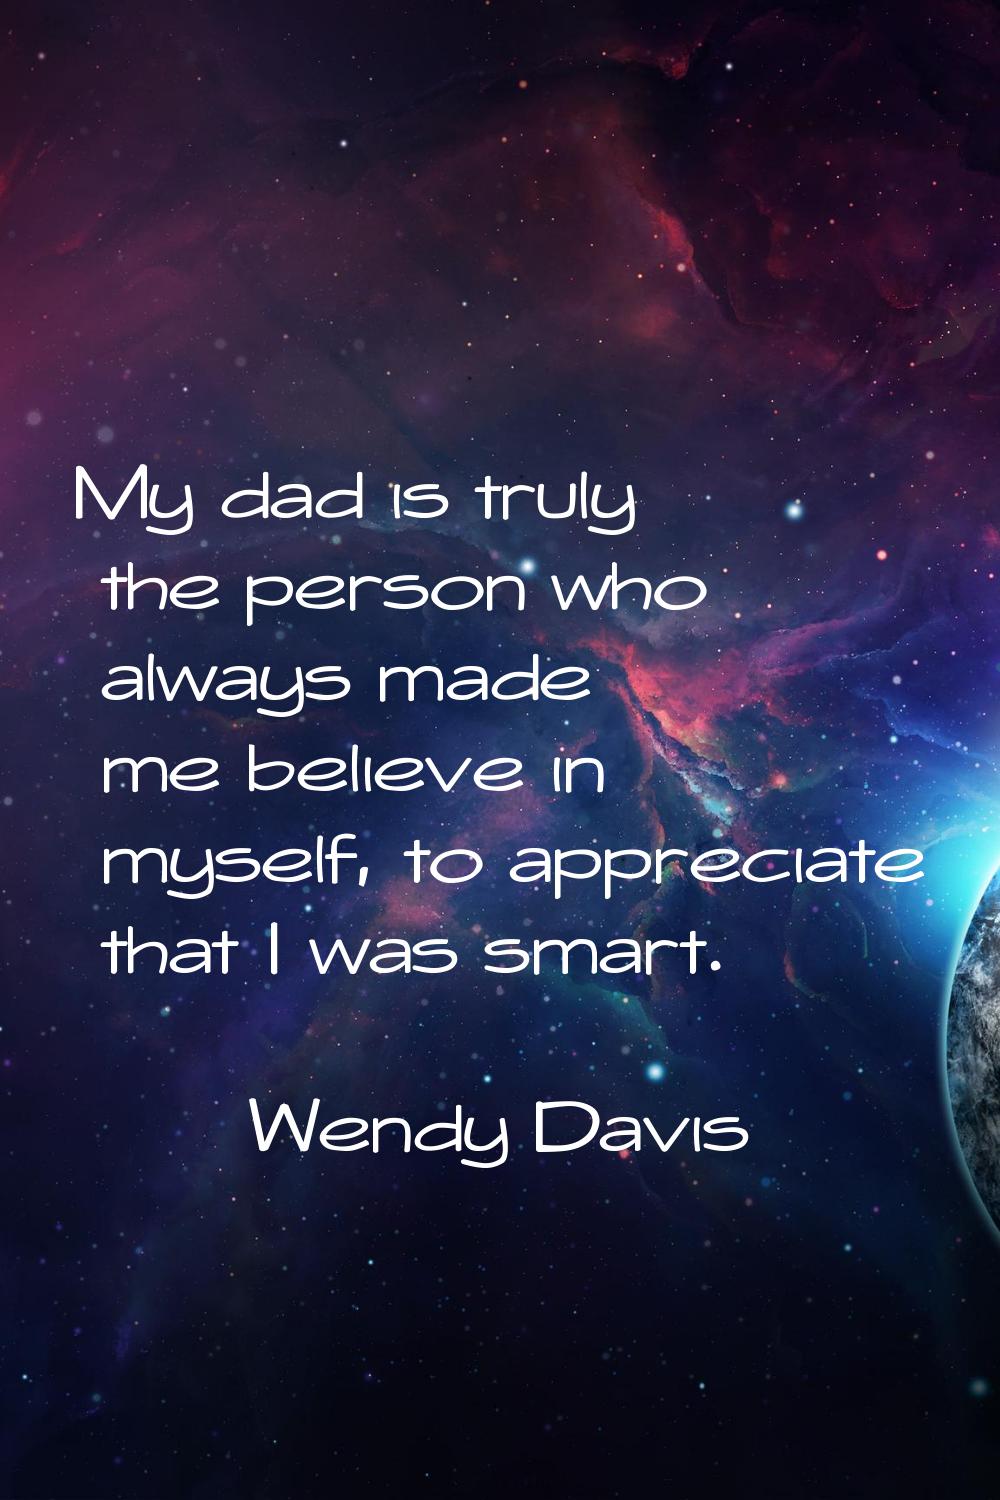 My dad is truly the person who always made me believe in myself, to appreciate that I was smart.